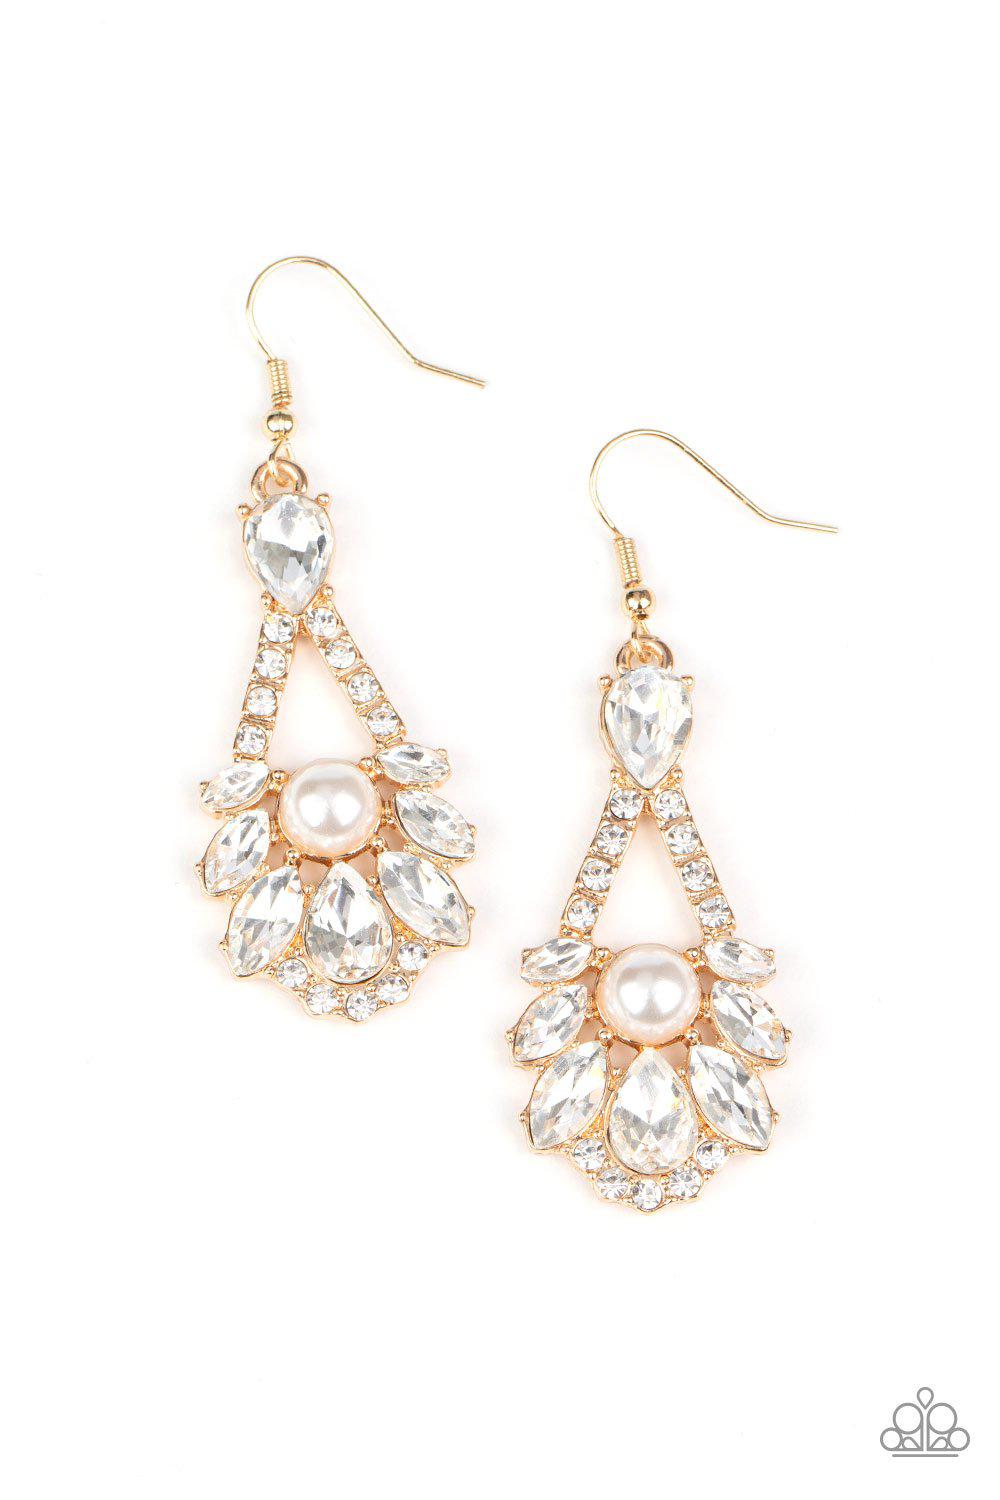 Prismatic Presence Gold and White Rhinestone and Pearl Earrings - Paparazzi Accessories Life of the Party Exclusive February 2021 - lightbox -CarasShop.com - $5 Jewelry by Cara Jewels